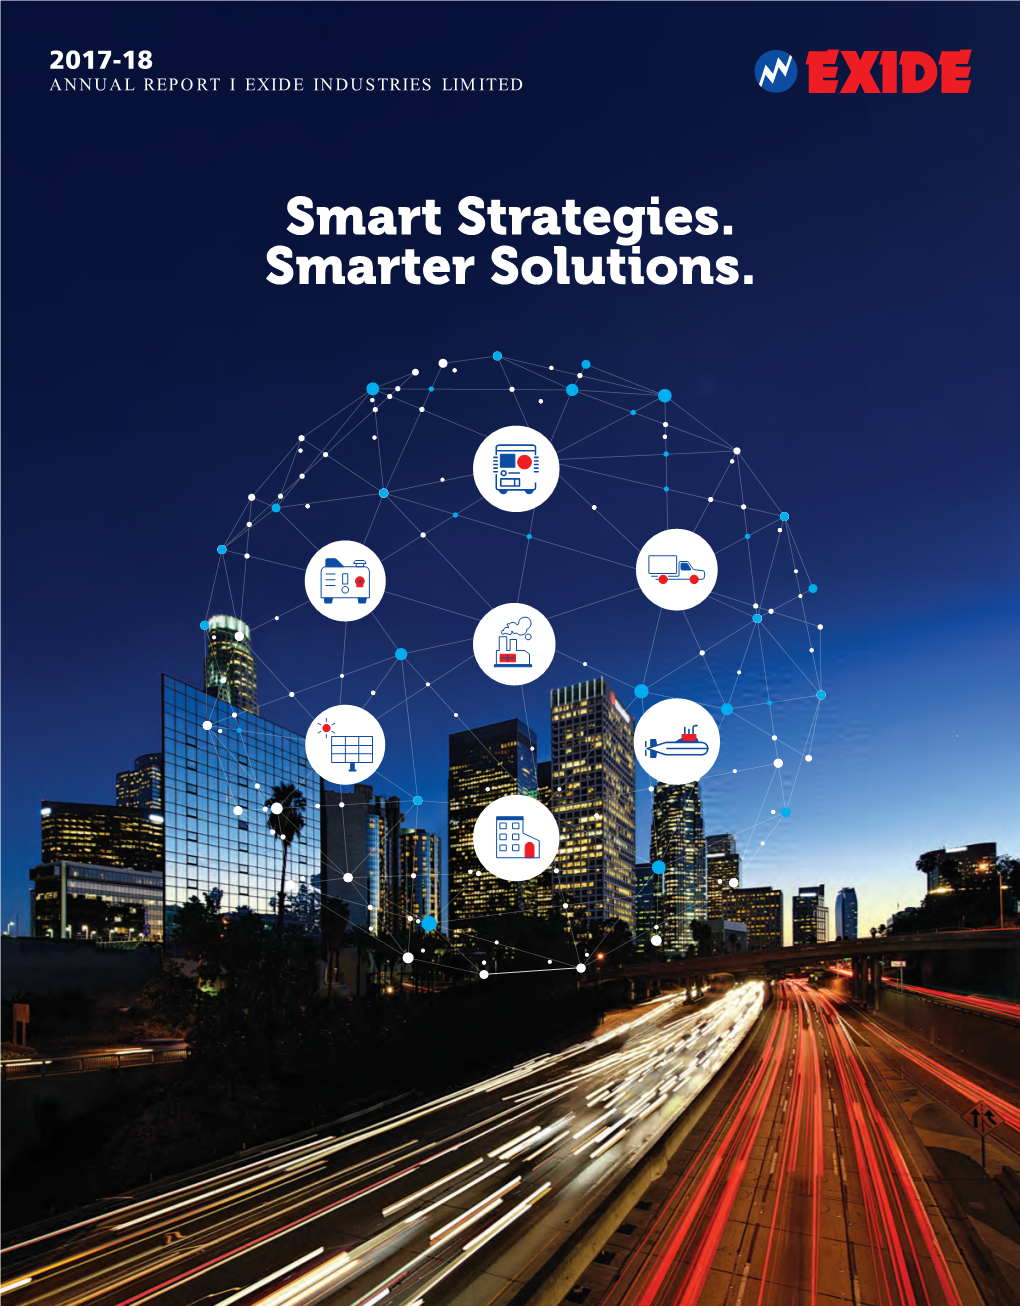 Smart Strategies. Smarter Solutions. 01-29 the Exide Story Inside Corporate Overview 01 Progressing Sustainably 06 Megatrends 08 This Report Smart Strategies